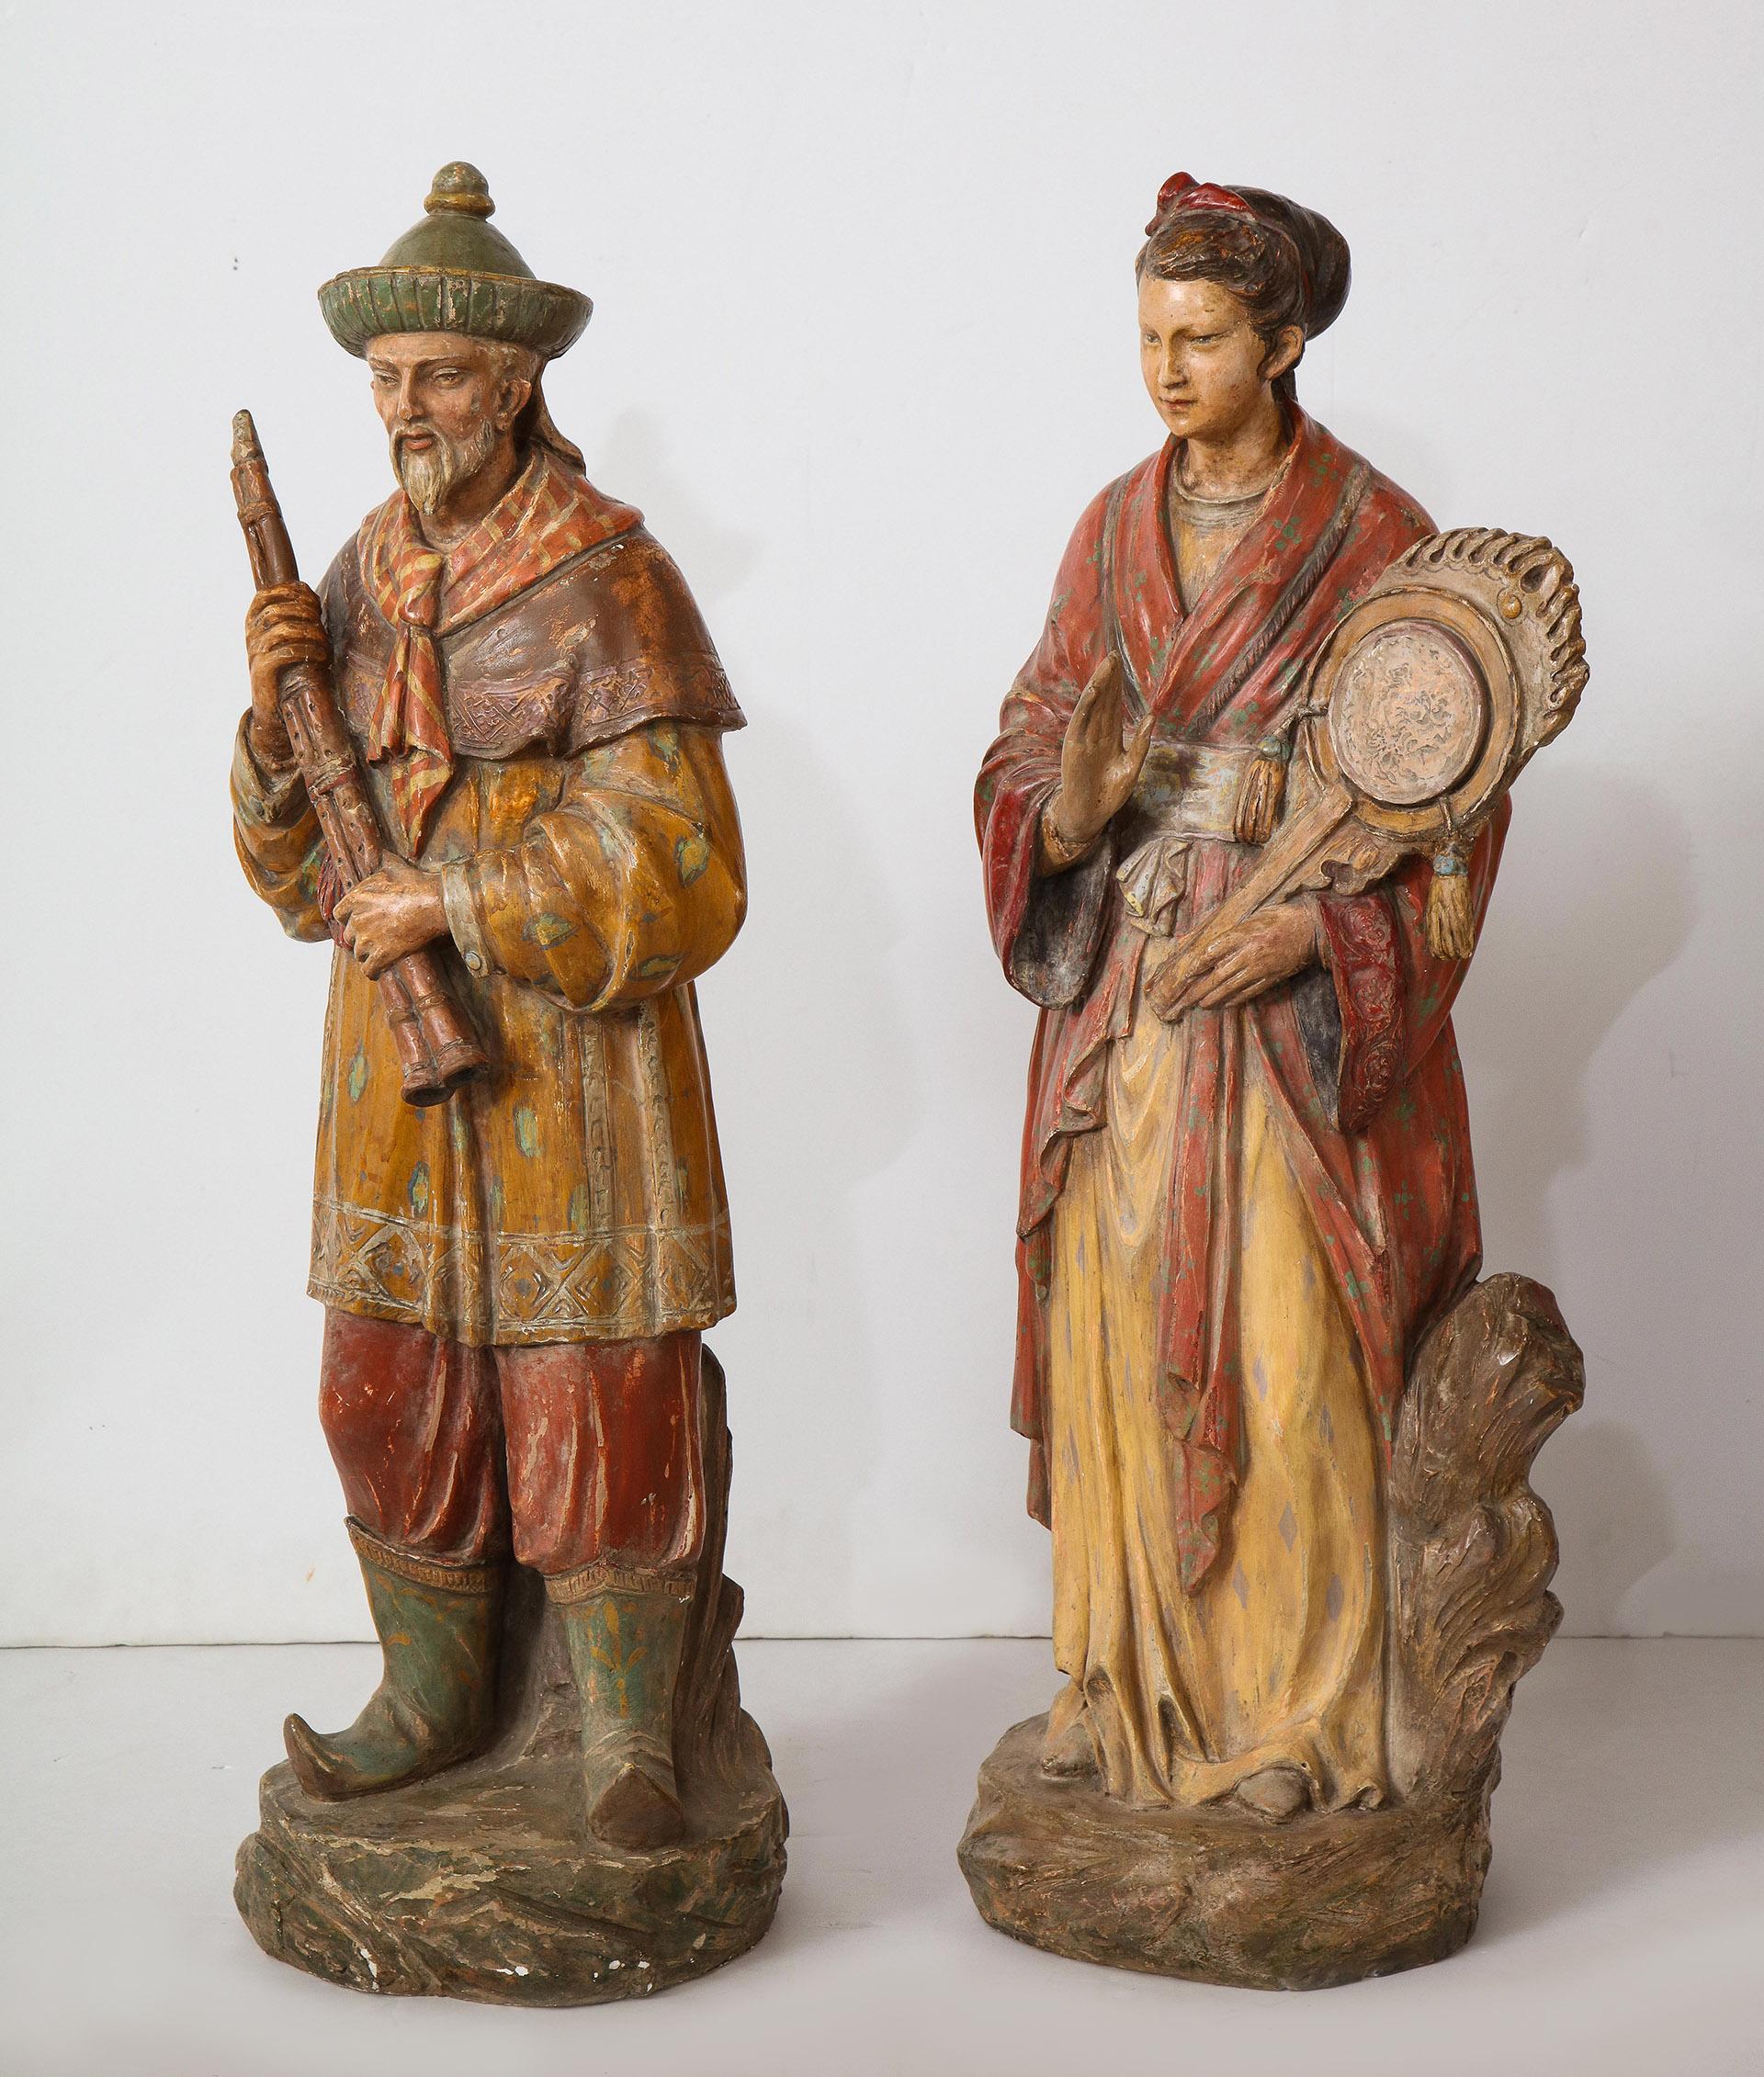 The pair of English ceramic figures showing a Chinese man and woman in traditional costume each holding a musical instrument.